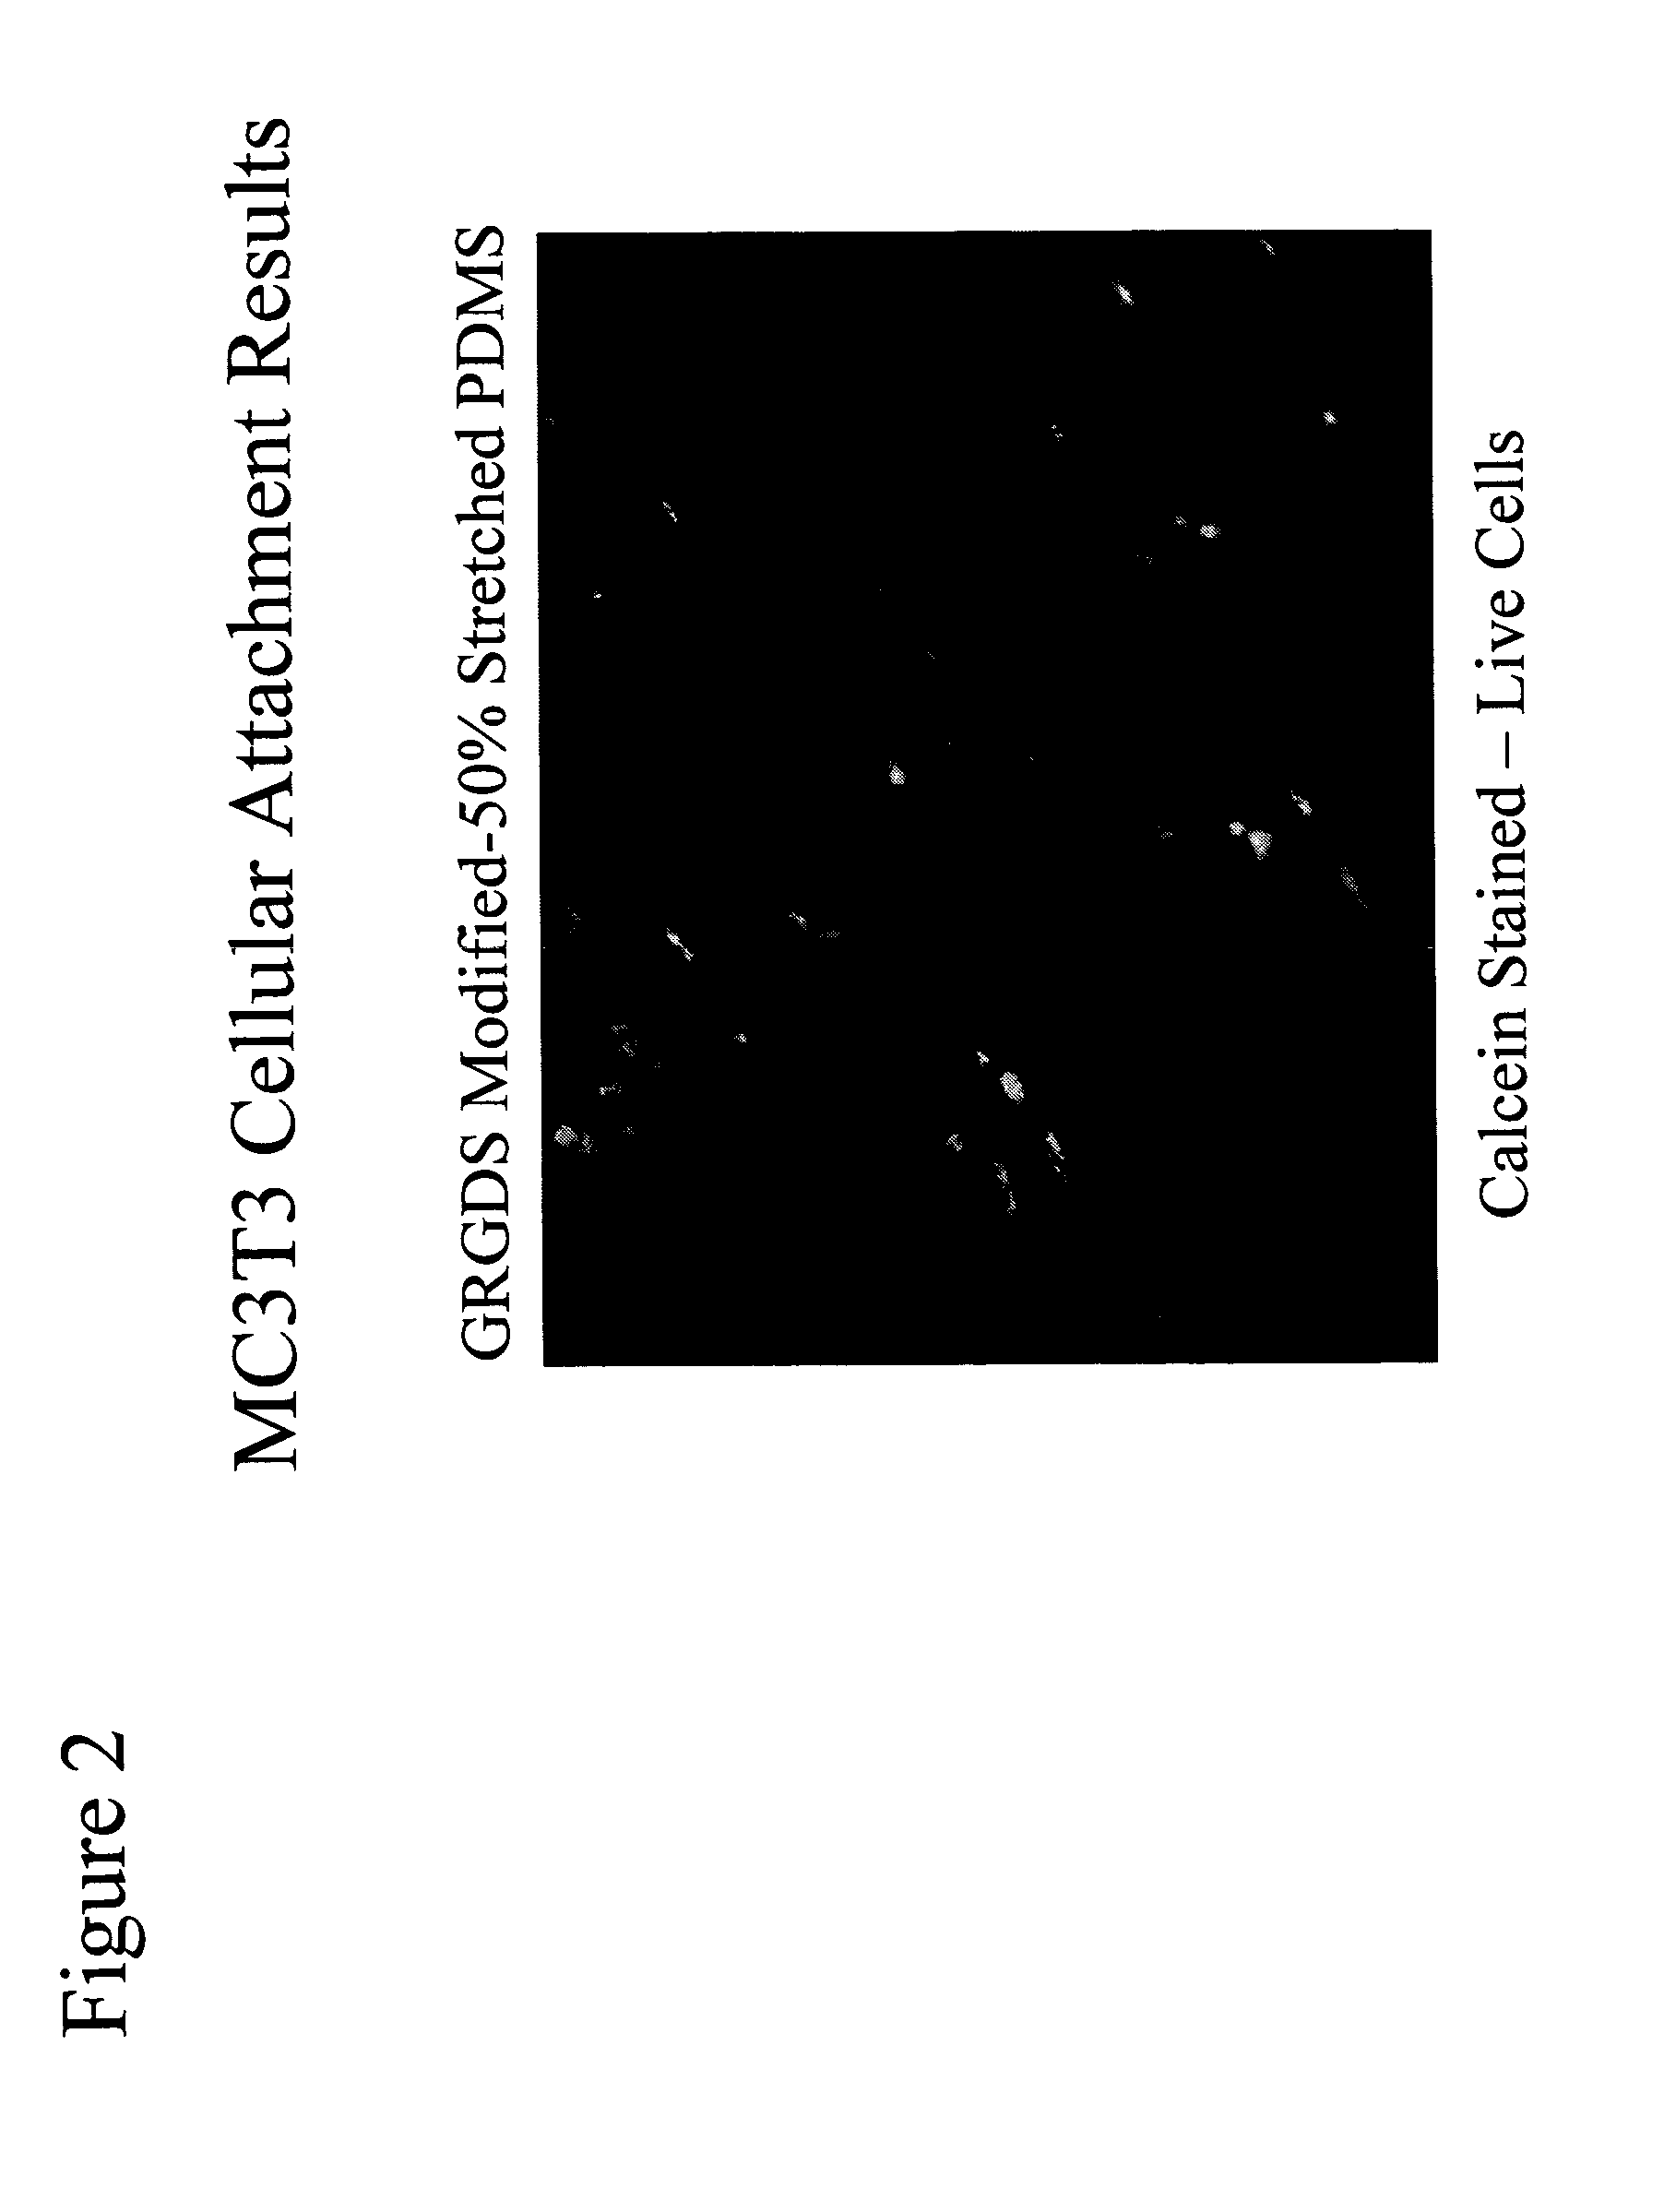 Methods of surface modification of a flexible substrate to enhance cell adhesion